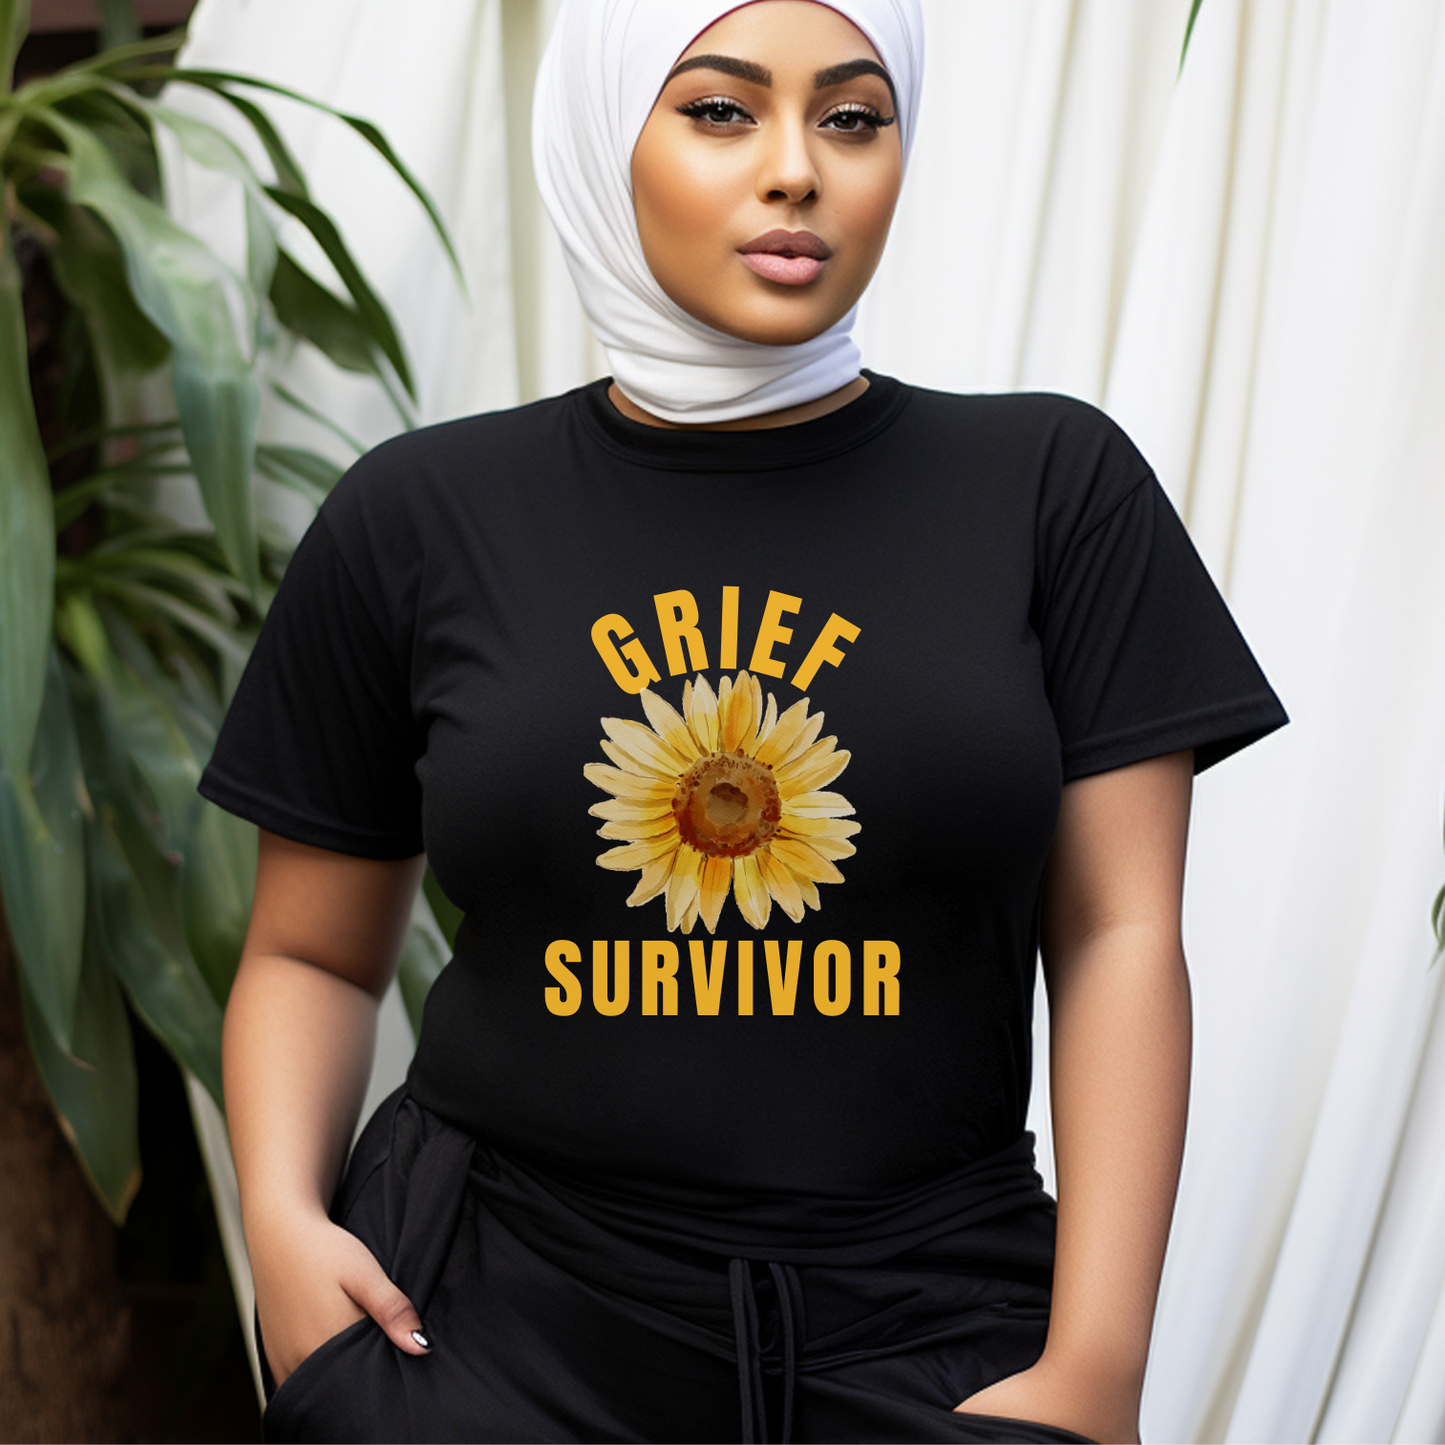 Black Bella Canvas 3001 t-shirt with Grief Survivor and graphic sunflower design. A beautiful way to honor resilience and personal strength.